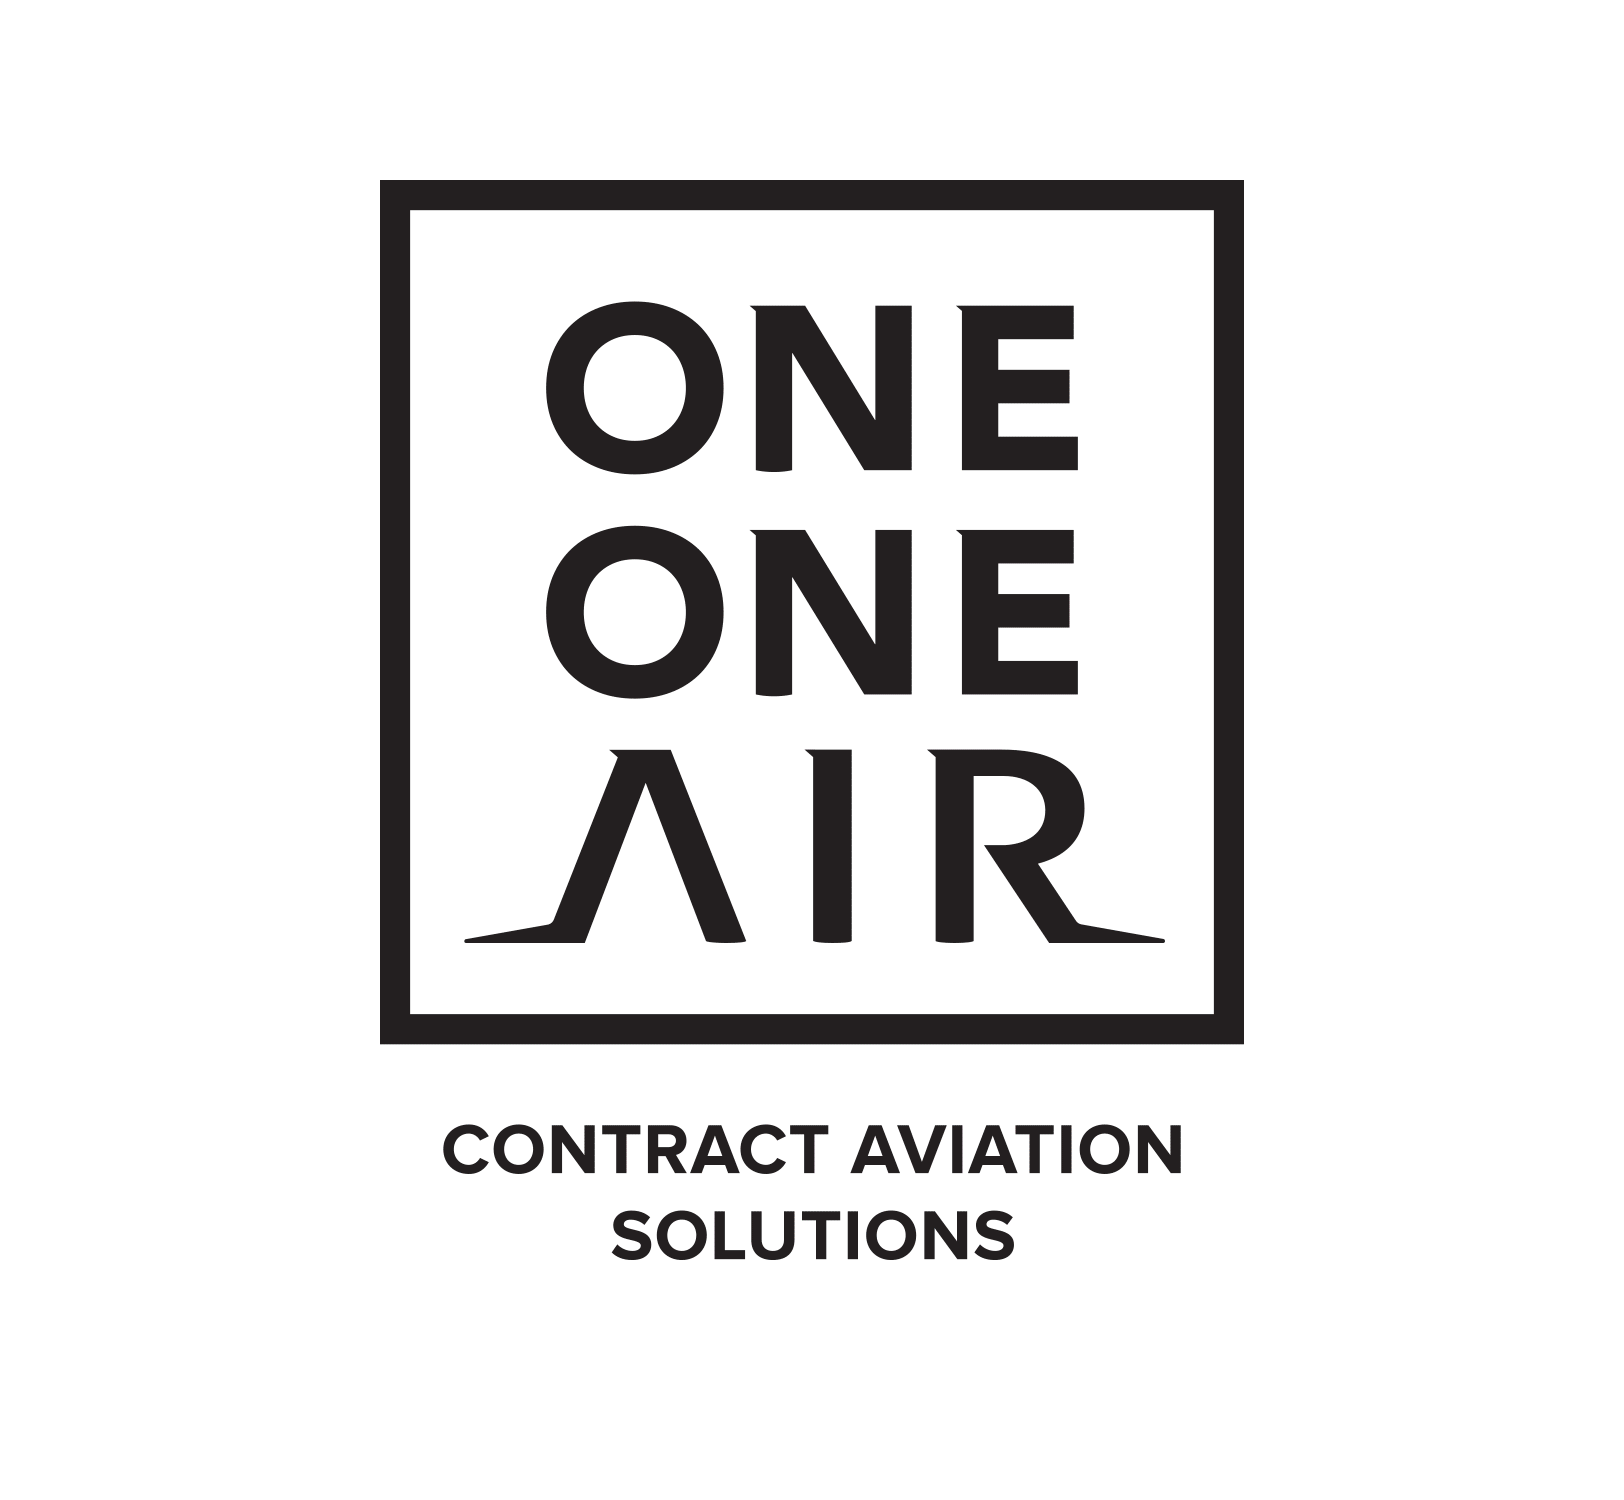 Commercial aviation solutions brand One One Air